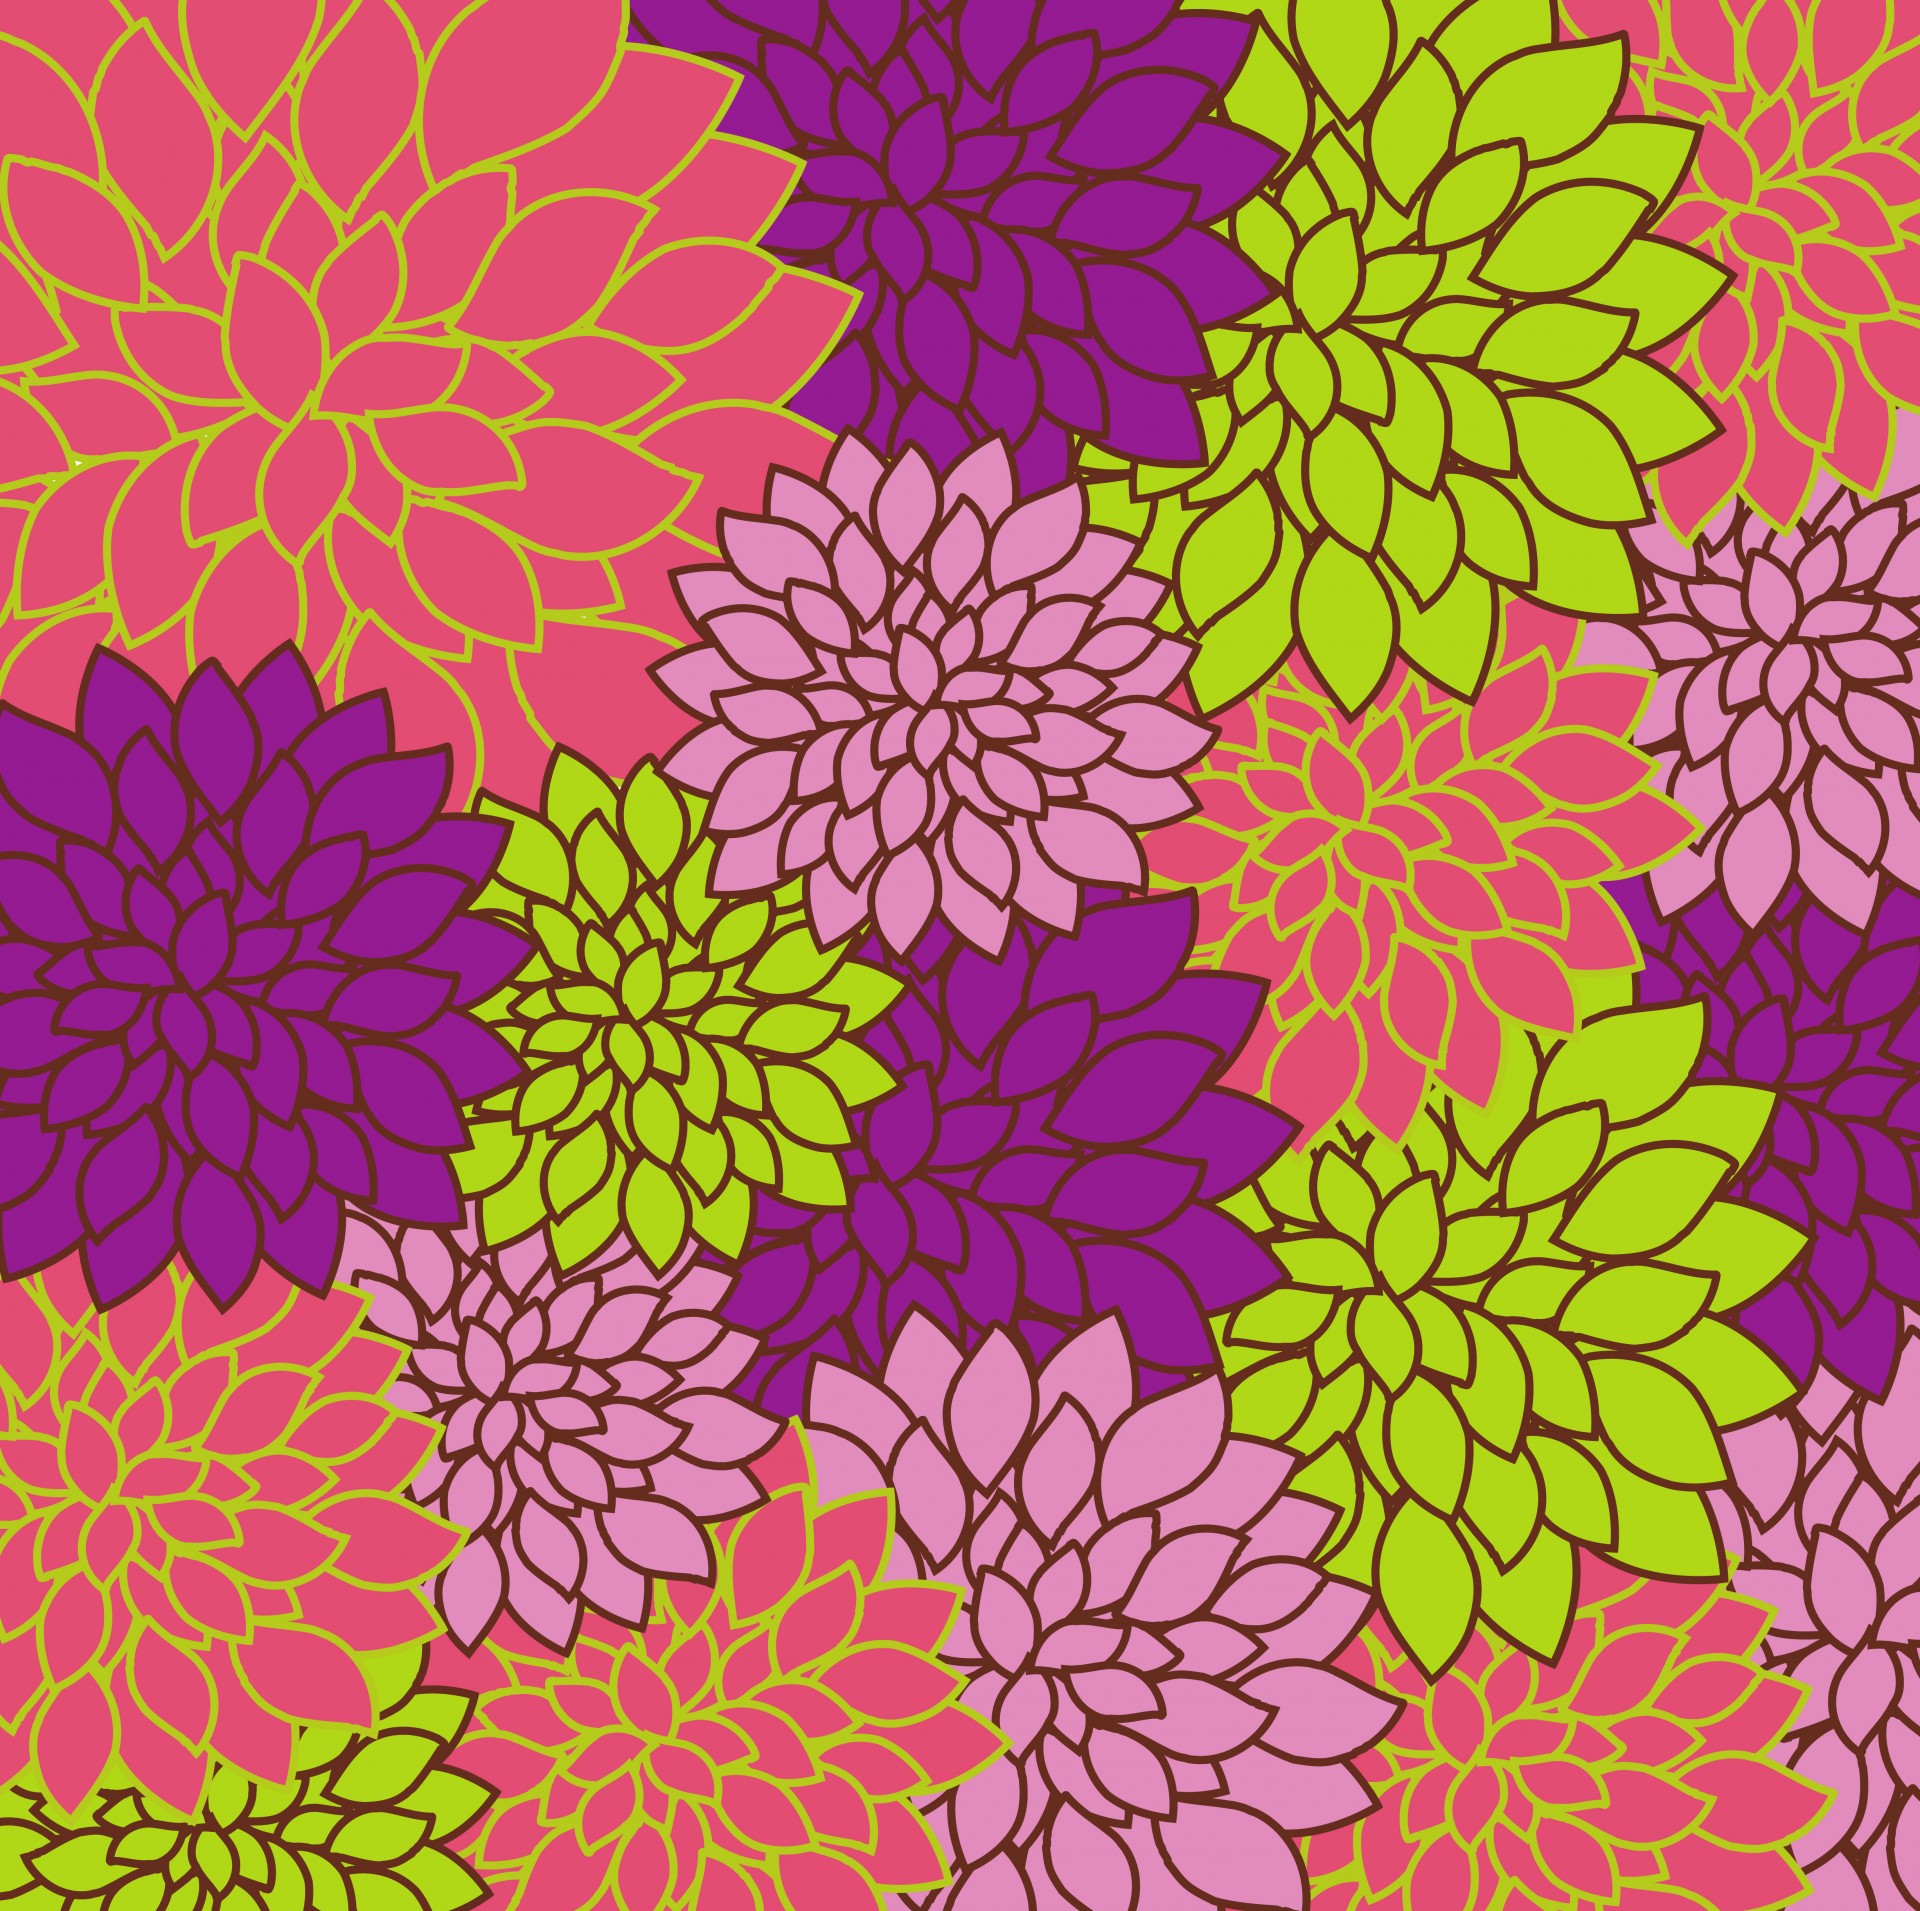 Floral Background Bright Colorful